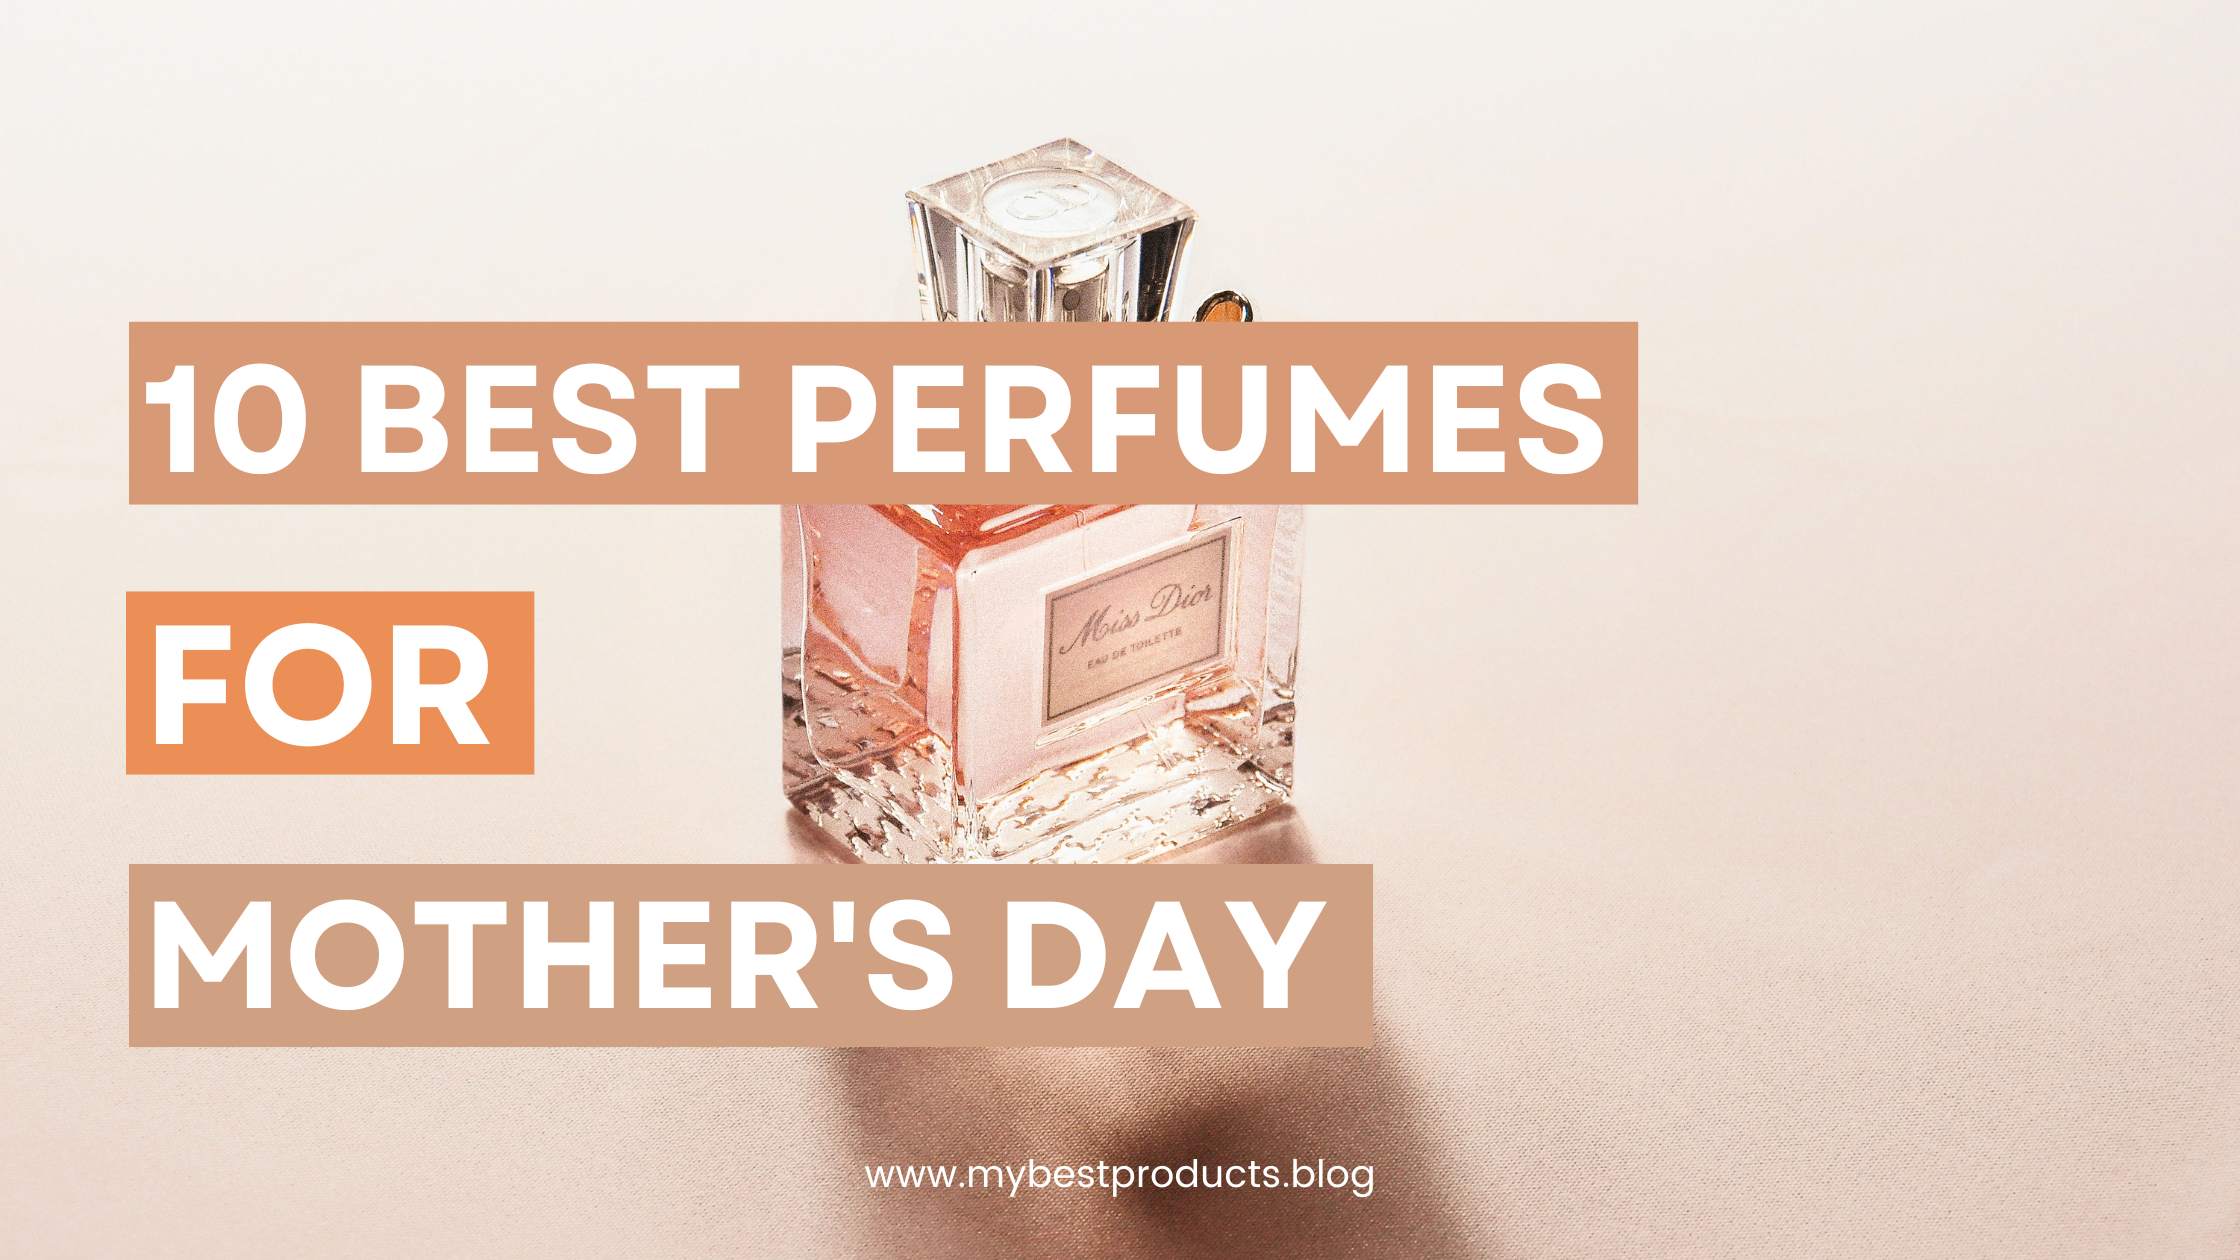 Best perfumes for mother's day